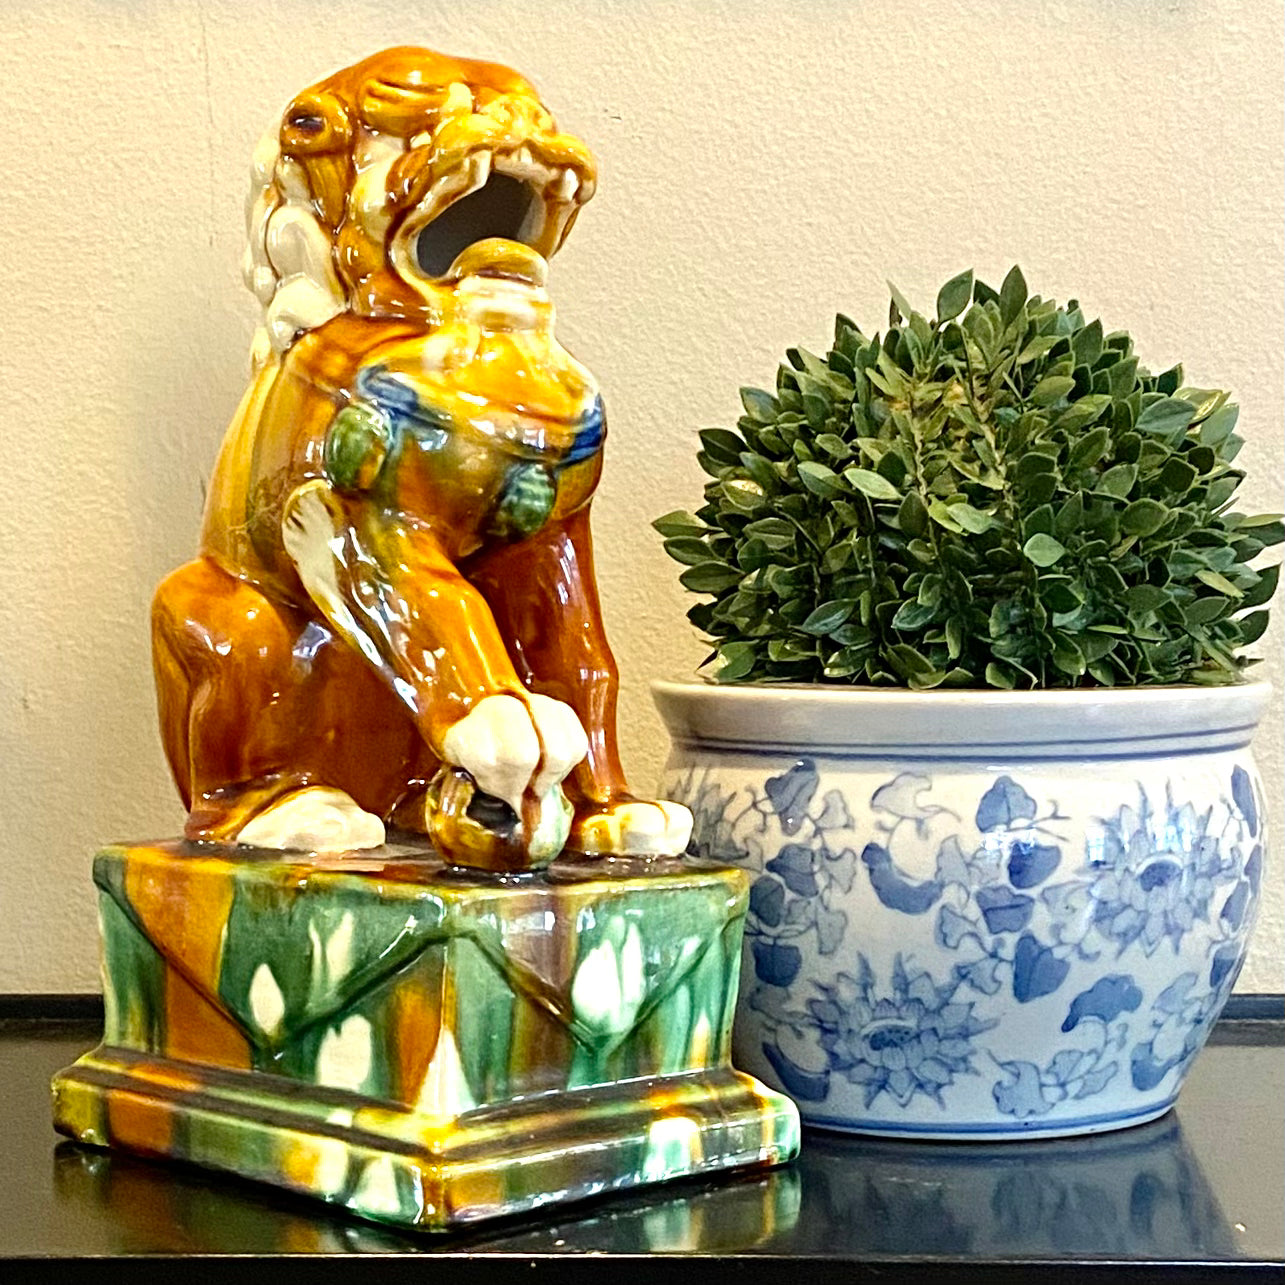 Vintage chinoiserie chic foo dog dragon statue or bookend 9.75 x 5.75 x 4.5 - pristine!